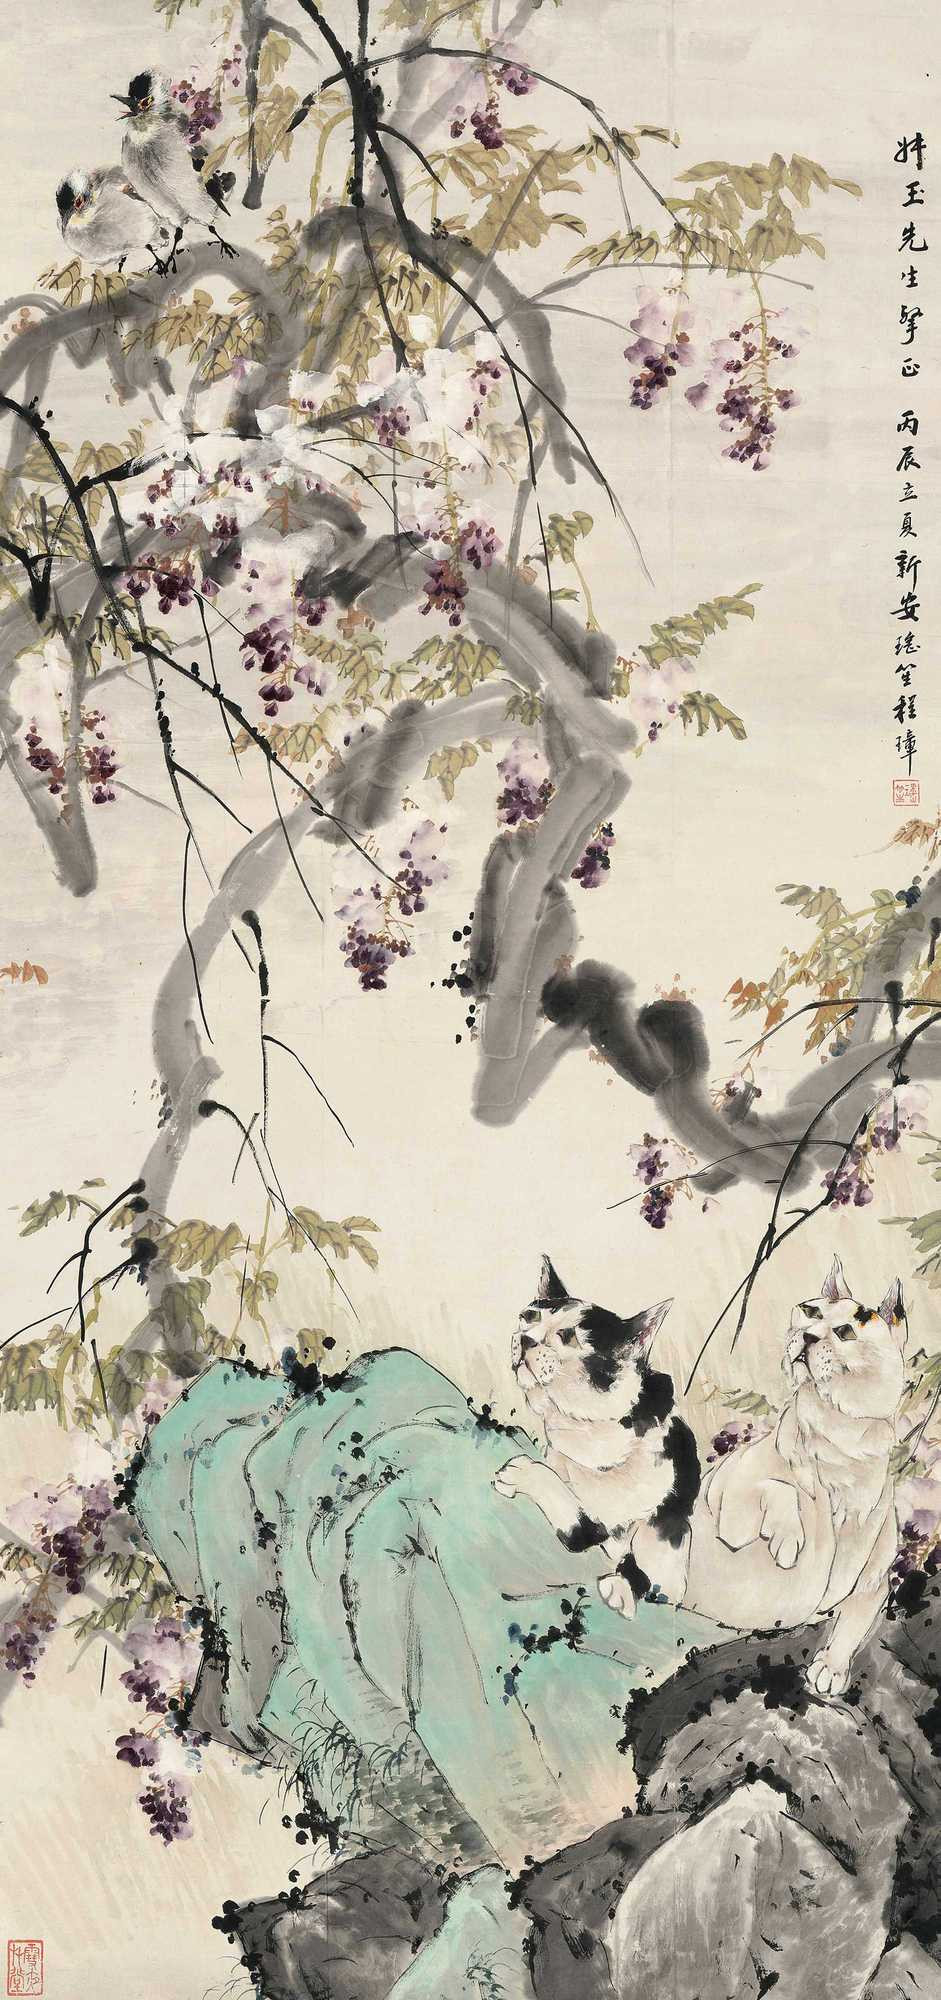 Blossoming Branches and Two Cats on Rock